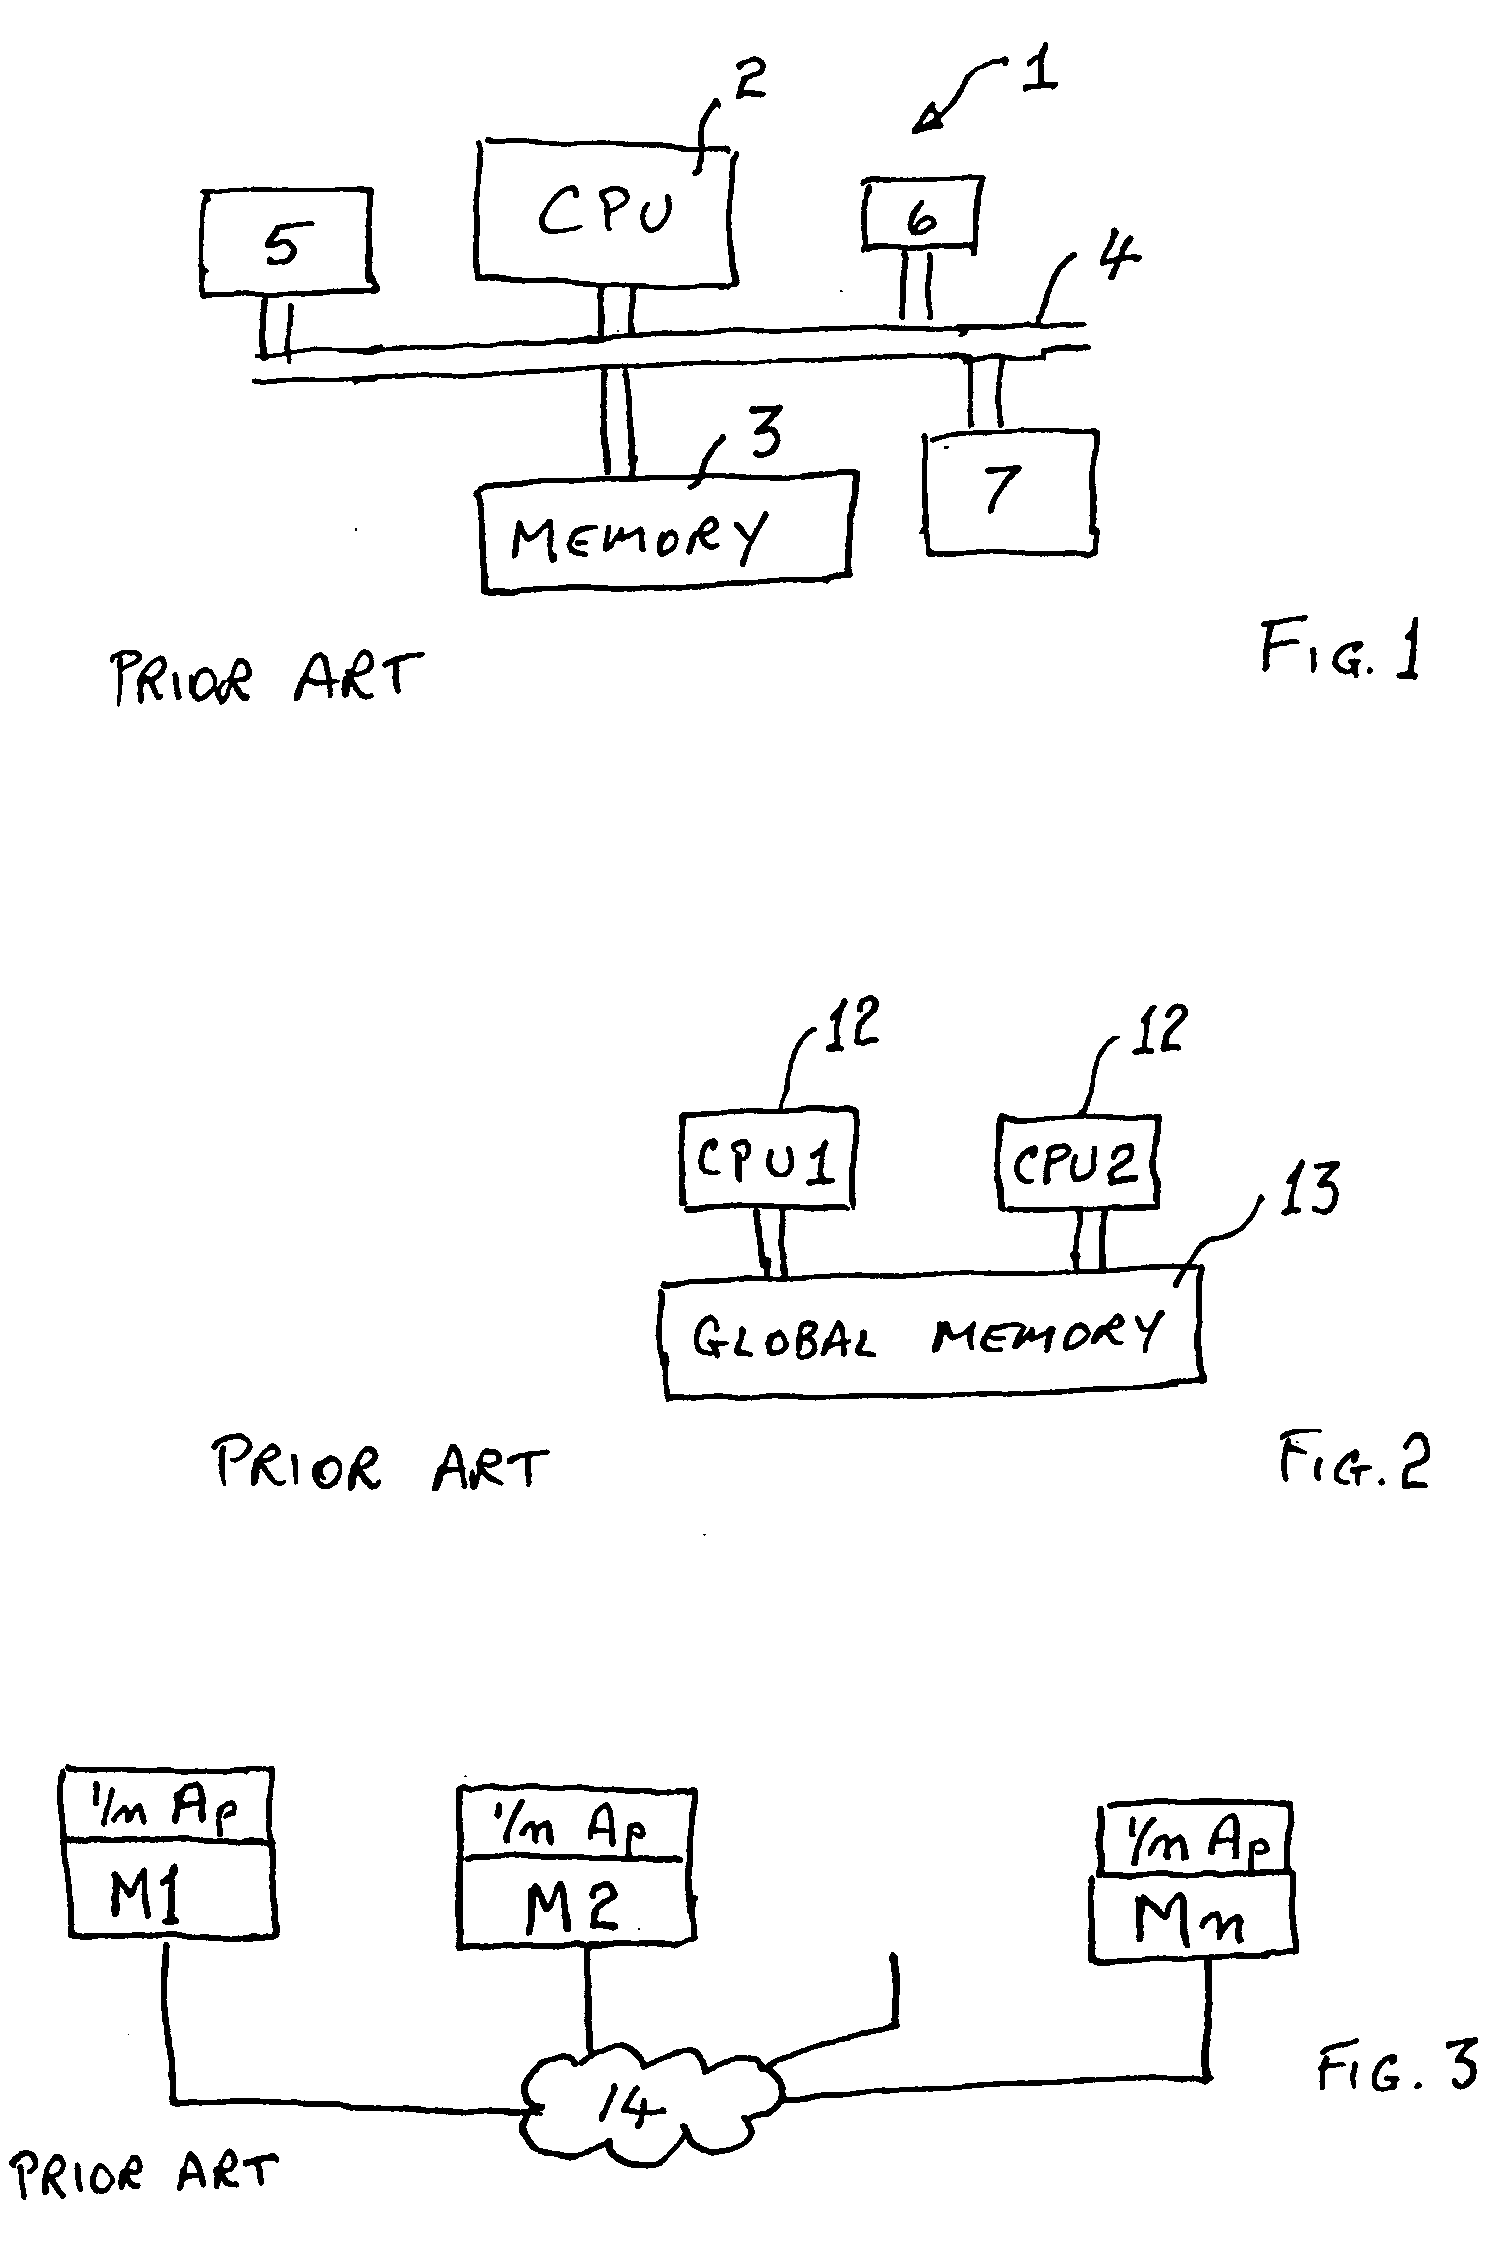 Modified computer architecture with coordinated objects